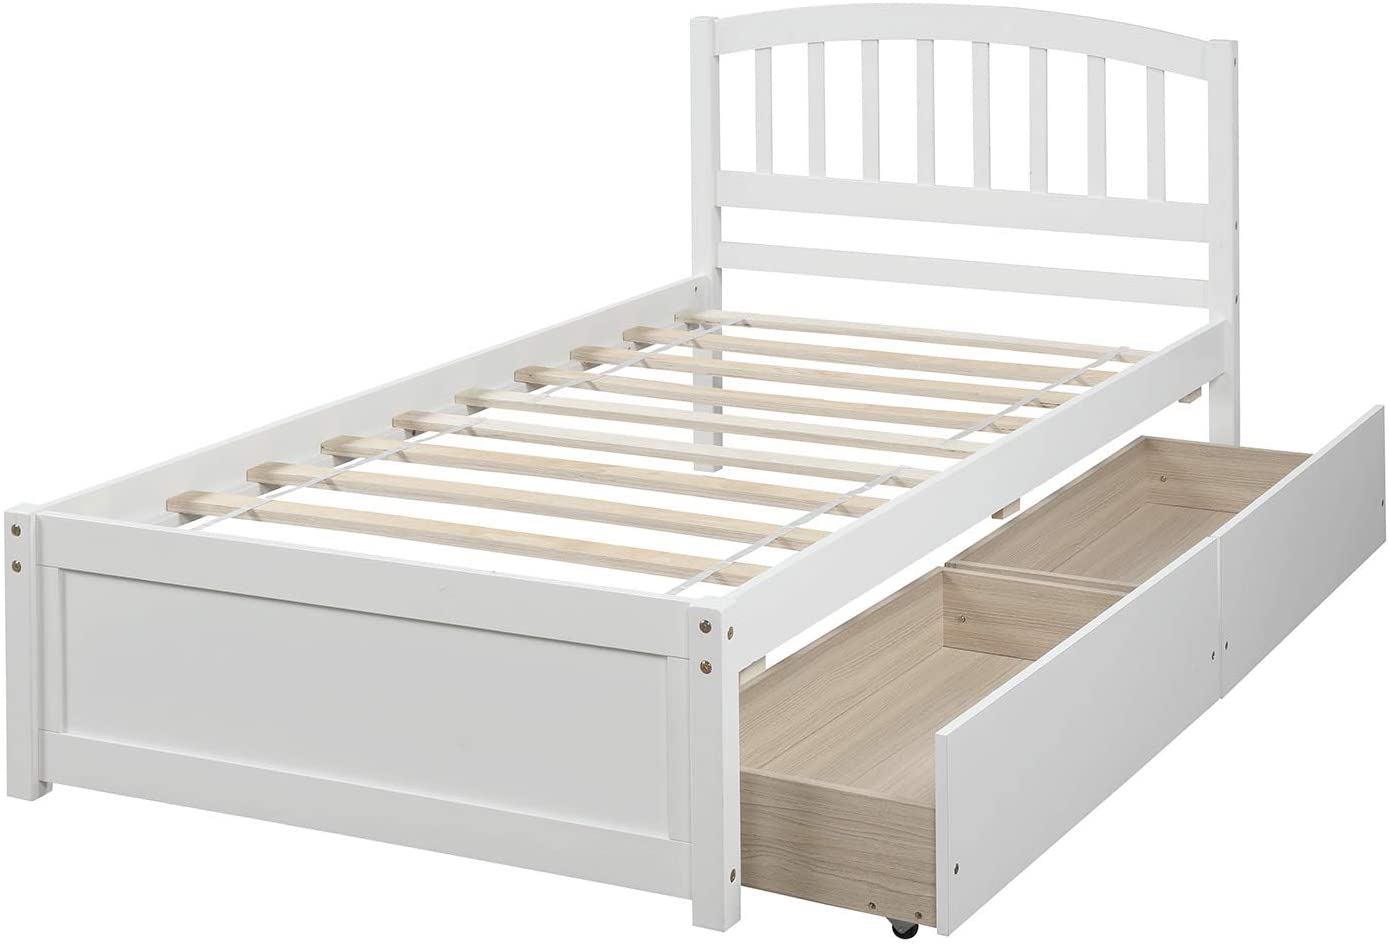 Twin Size Platform Bed with Two Storage Drawers, Wood Bed Frame with Headboard, White 79.5x41.8x37.4inch - image 4 of 7